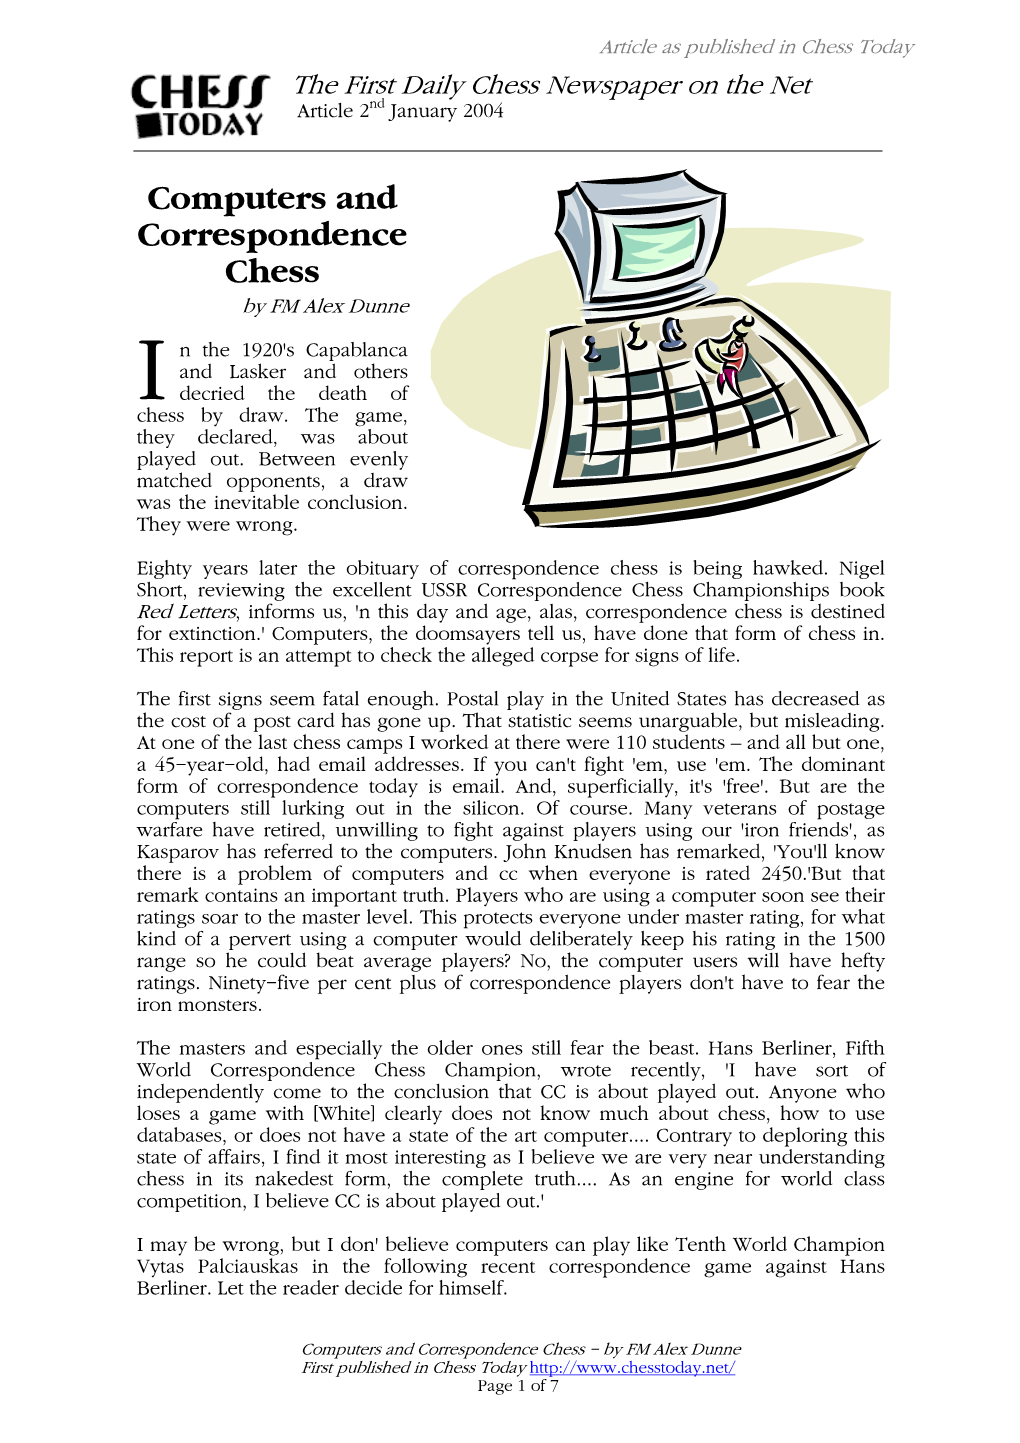 Computers and Correspondence Chess by FM Alex Dunne